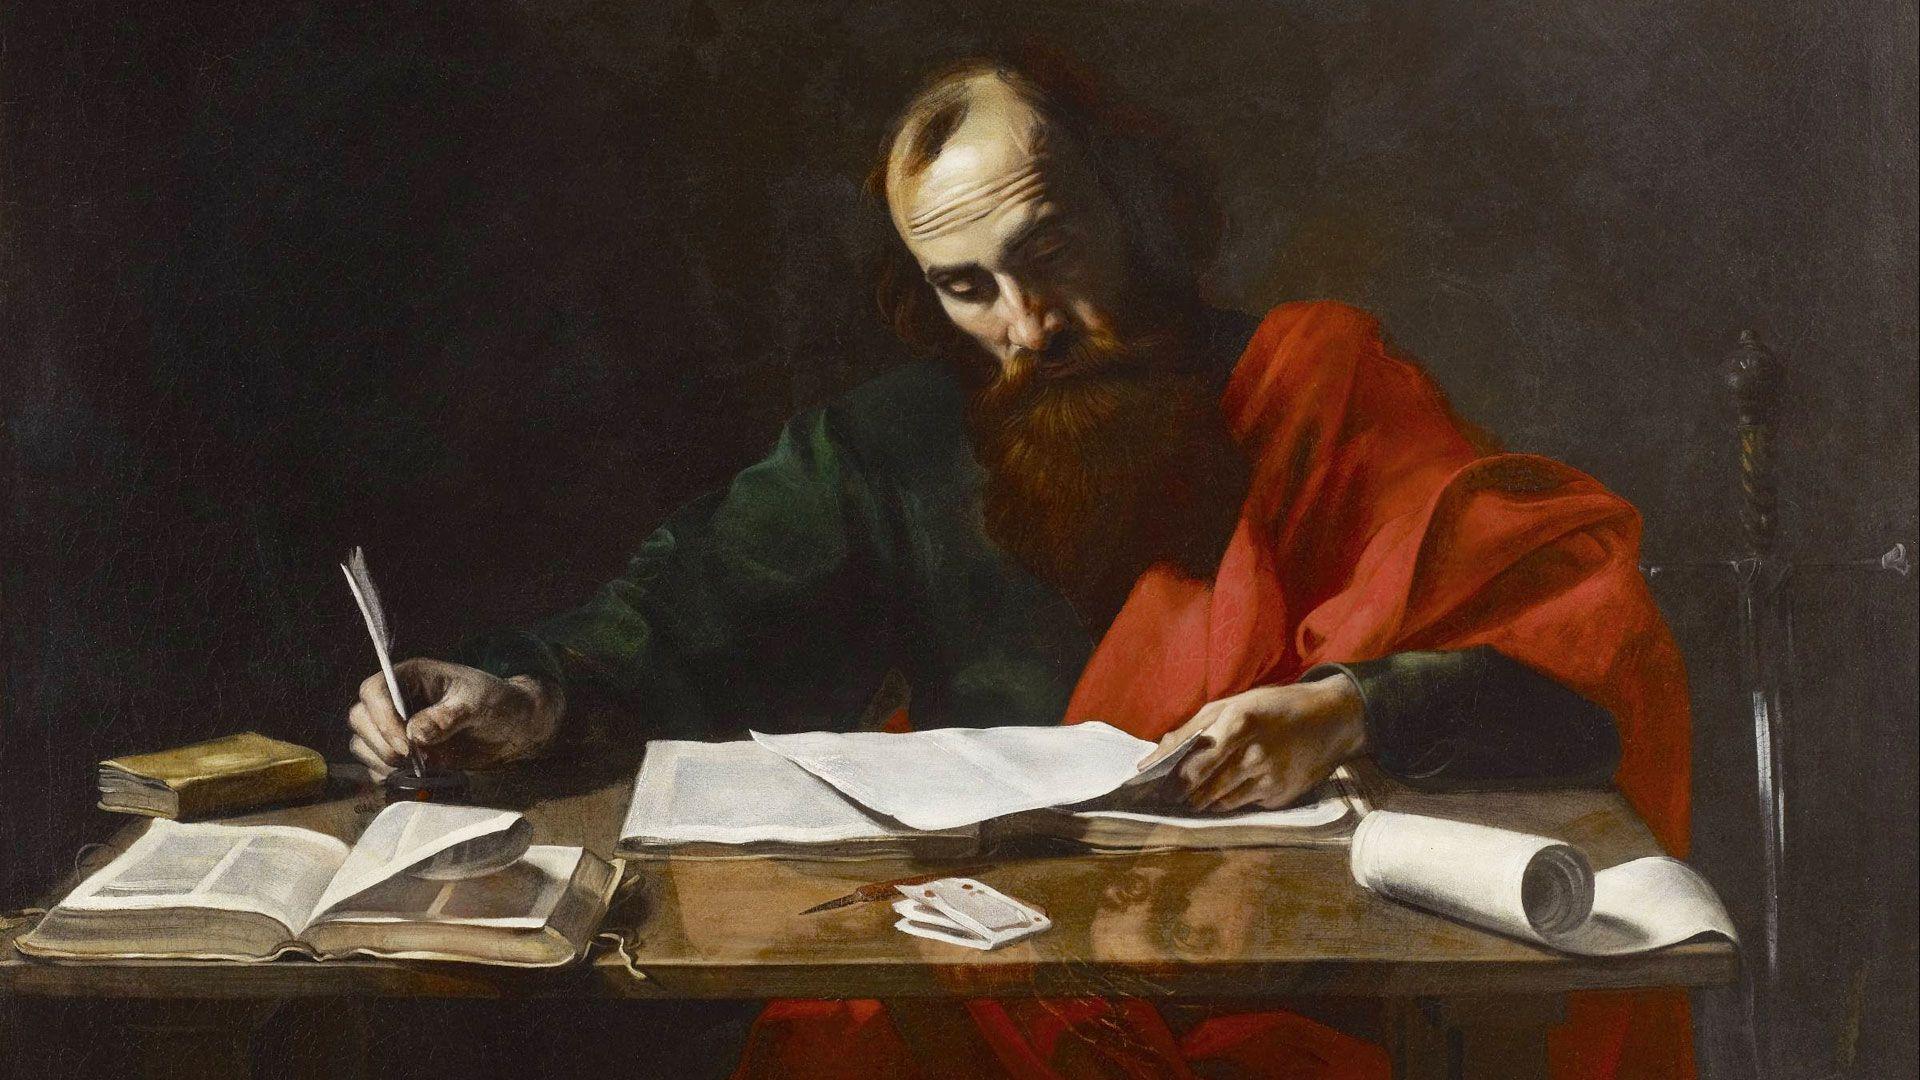 The Apostles, Part 10: Productive in Prison